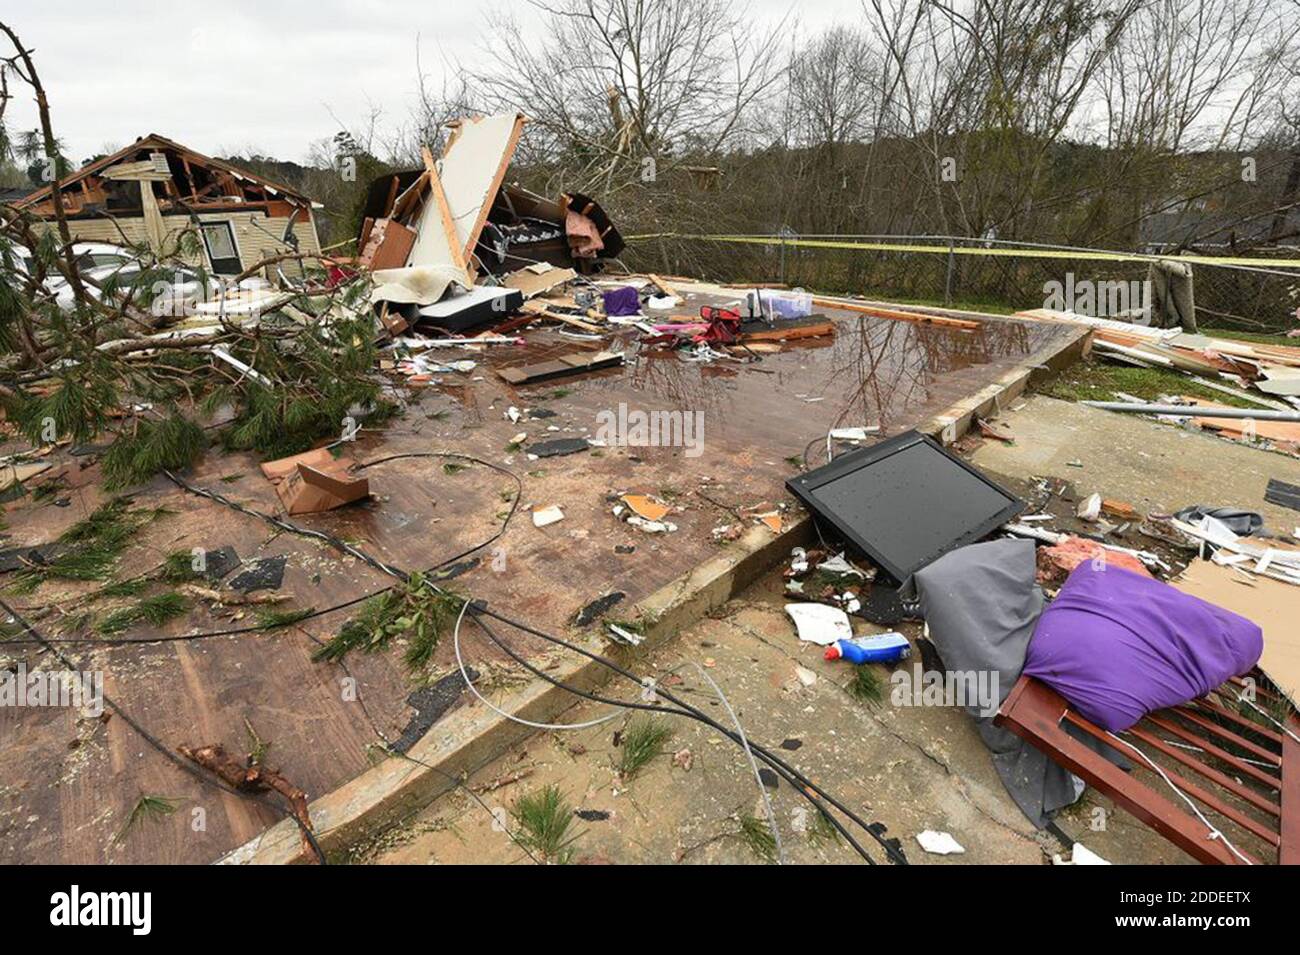 NO FILM, NO VIDEO, NO TV, NO DOCUMENTARY - There is nothing left of #16. The home was swept off of its foundation. This neighborhood just off Lee CR 430 received severe tornado damage. Tornado damage in Smith's Station, Alabama on March 4, 2019. At least 23 people are confirmed dead following Sunday's tornado outbreak with violent storms that left debris strewn across southern Alabama and Georgia. Photo by Joe Songer/Alabama Media Group/TNS/ABACAPRESS.COM Stock Photo